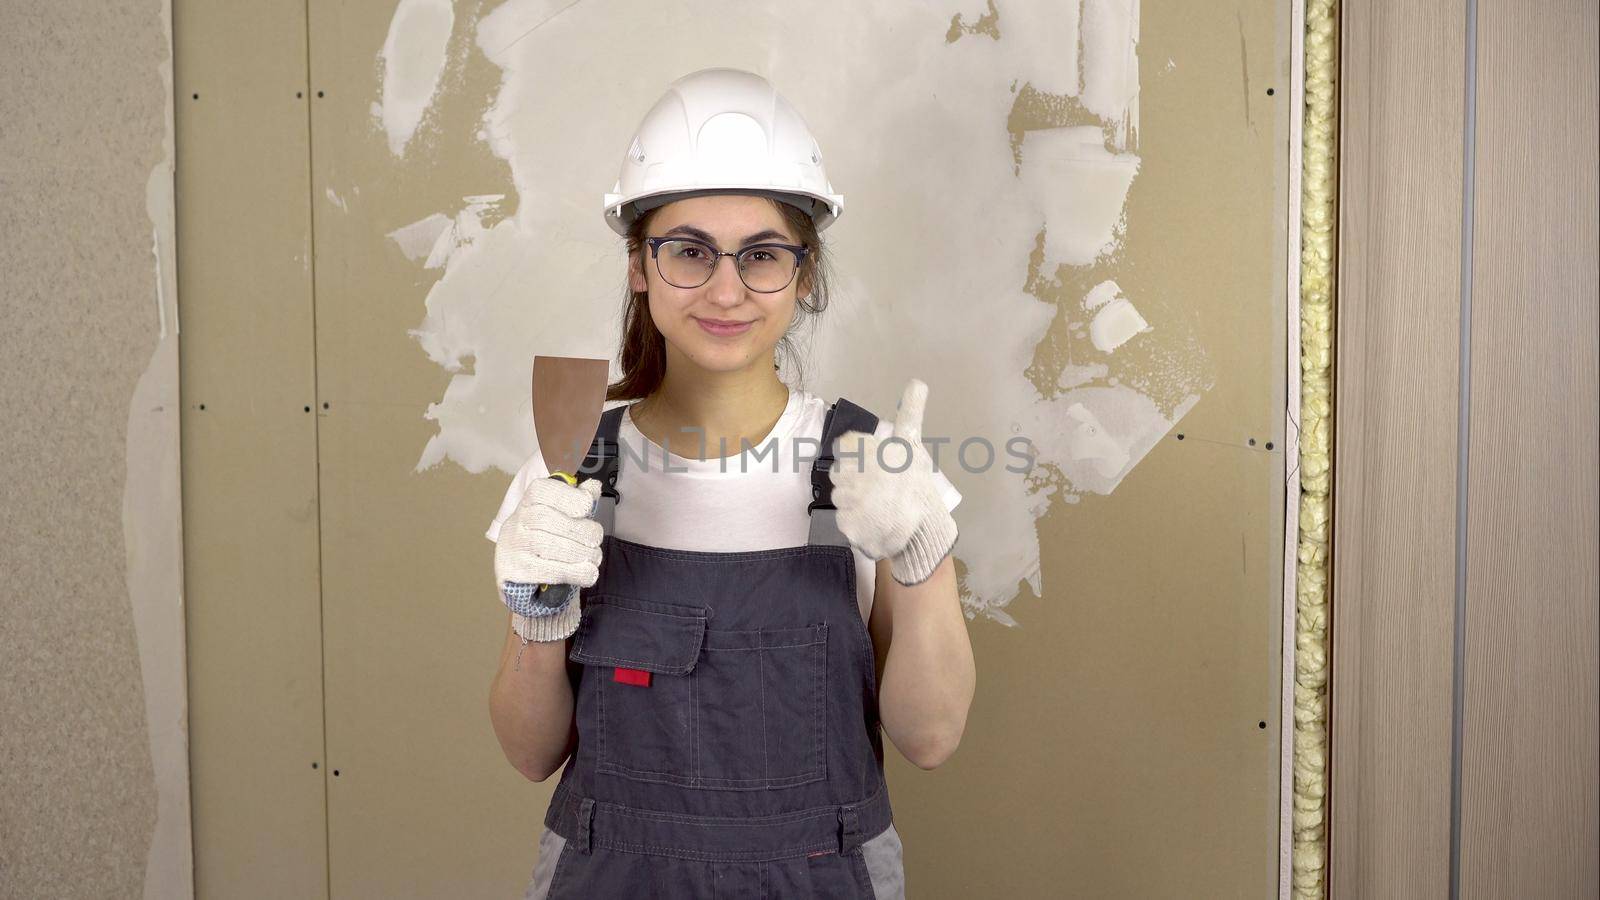 A builder with a spatula in her hand looks at the camera and shows the class and smiles. A woman in special clothes and a helmet makes repairs. 4k